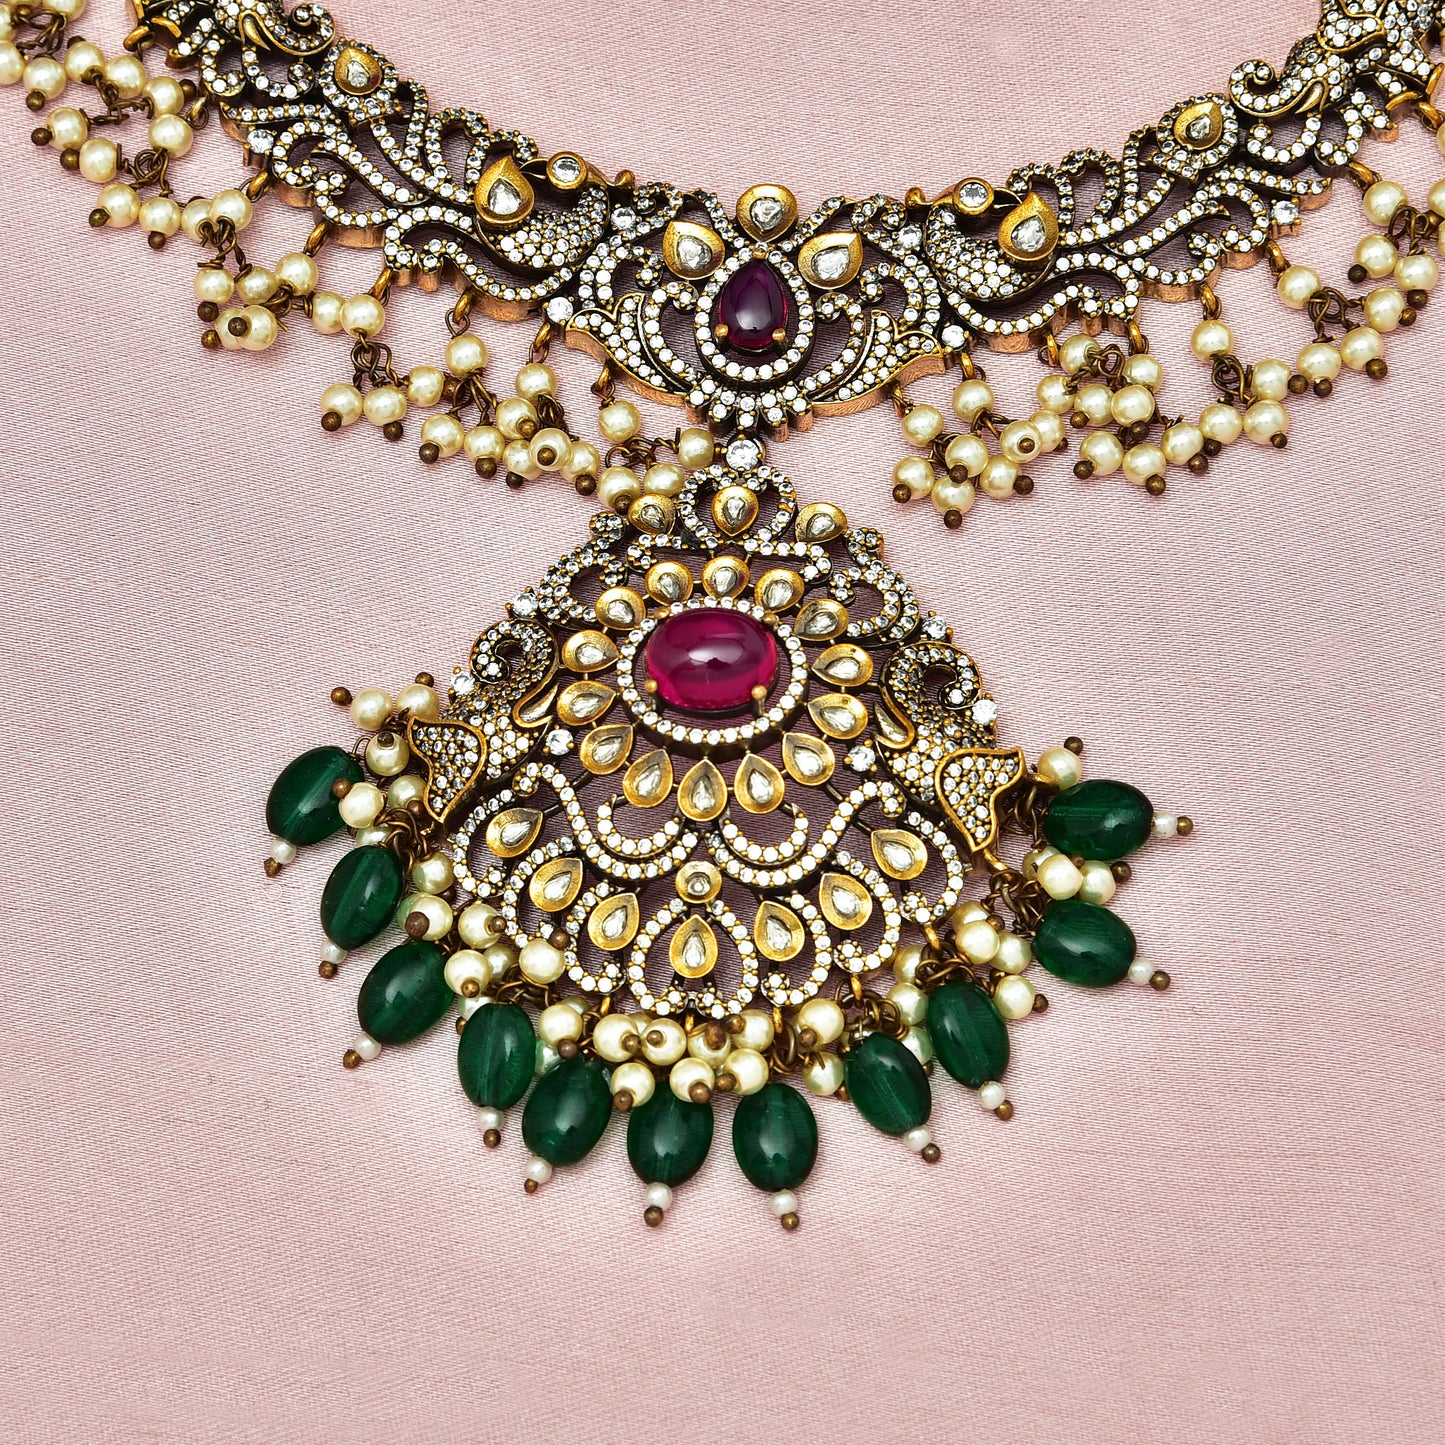 Zirconia Ruby And Emerald Stone Victorian Necklace Set